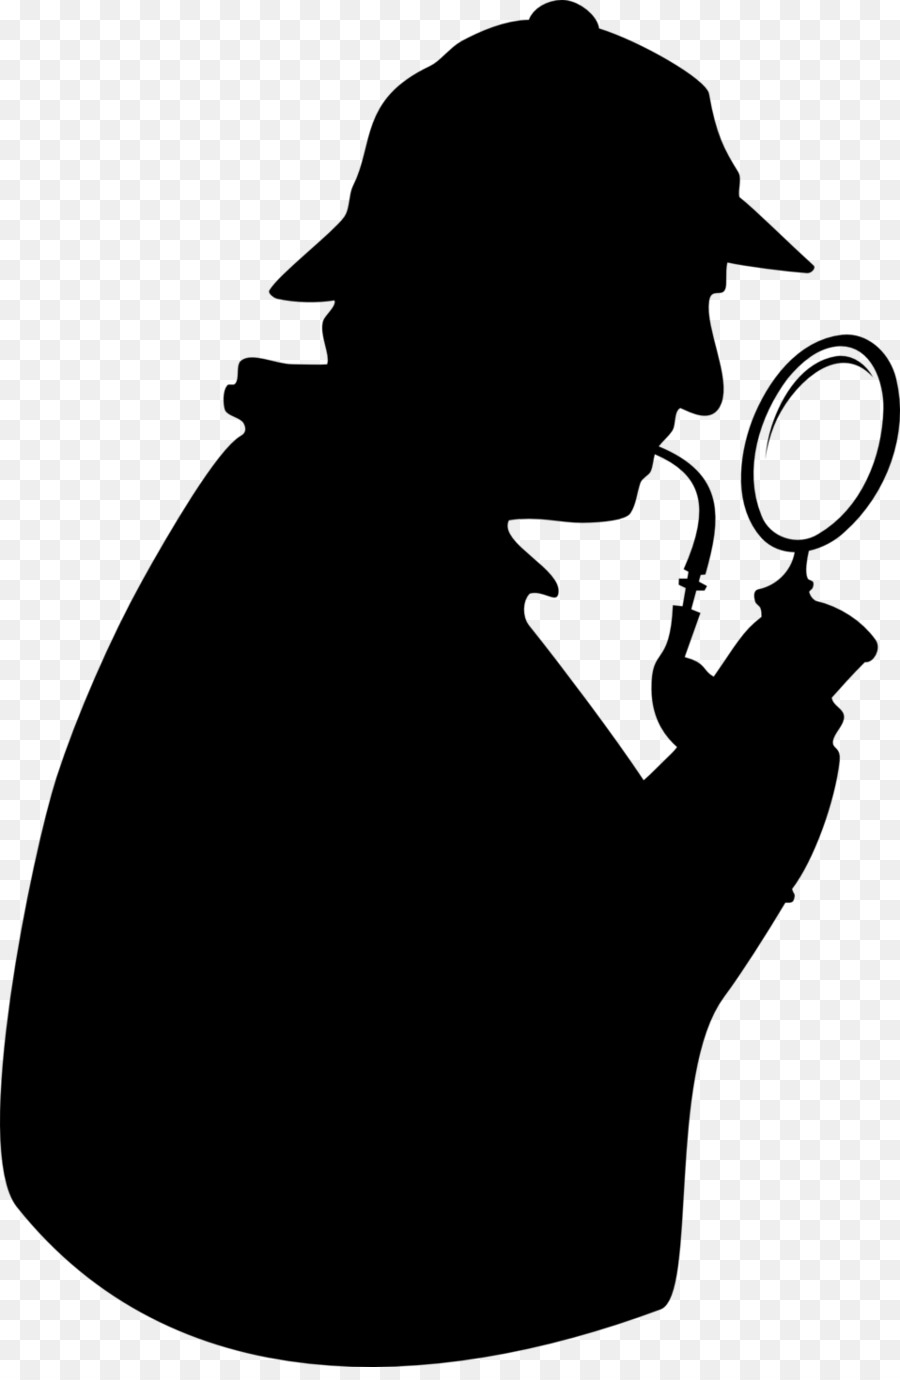 magnifying glass clipart silhouette